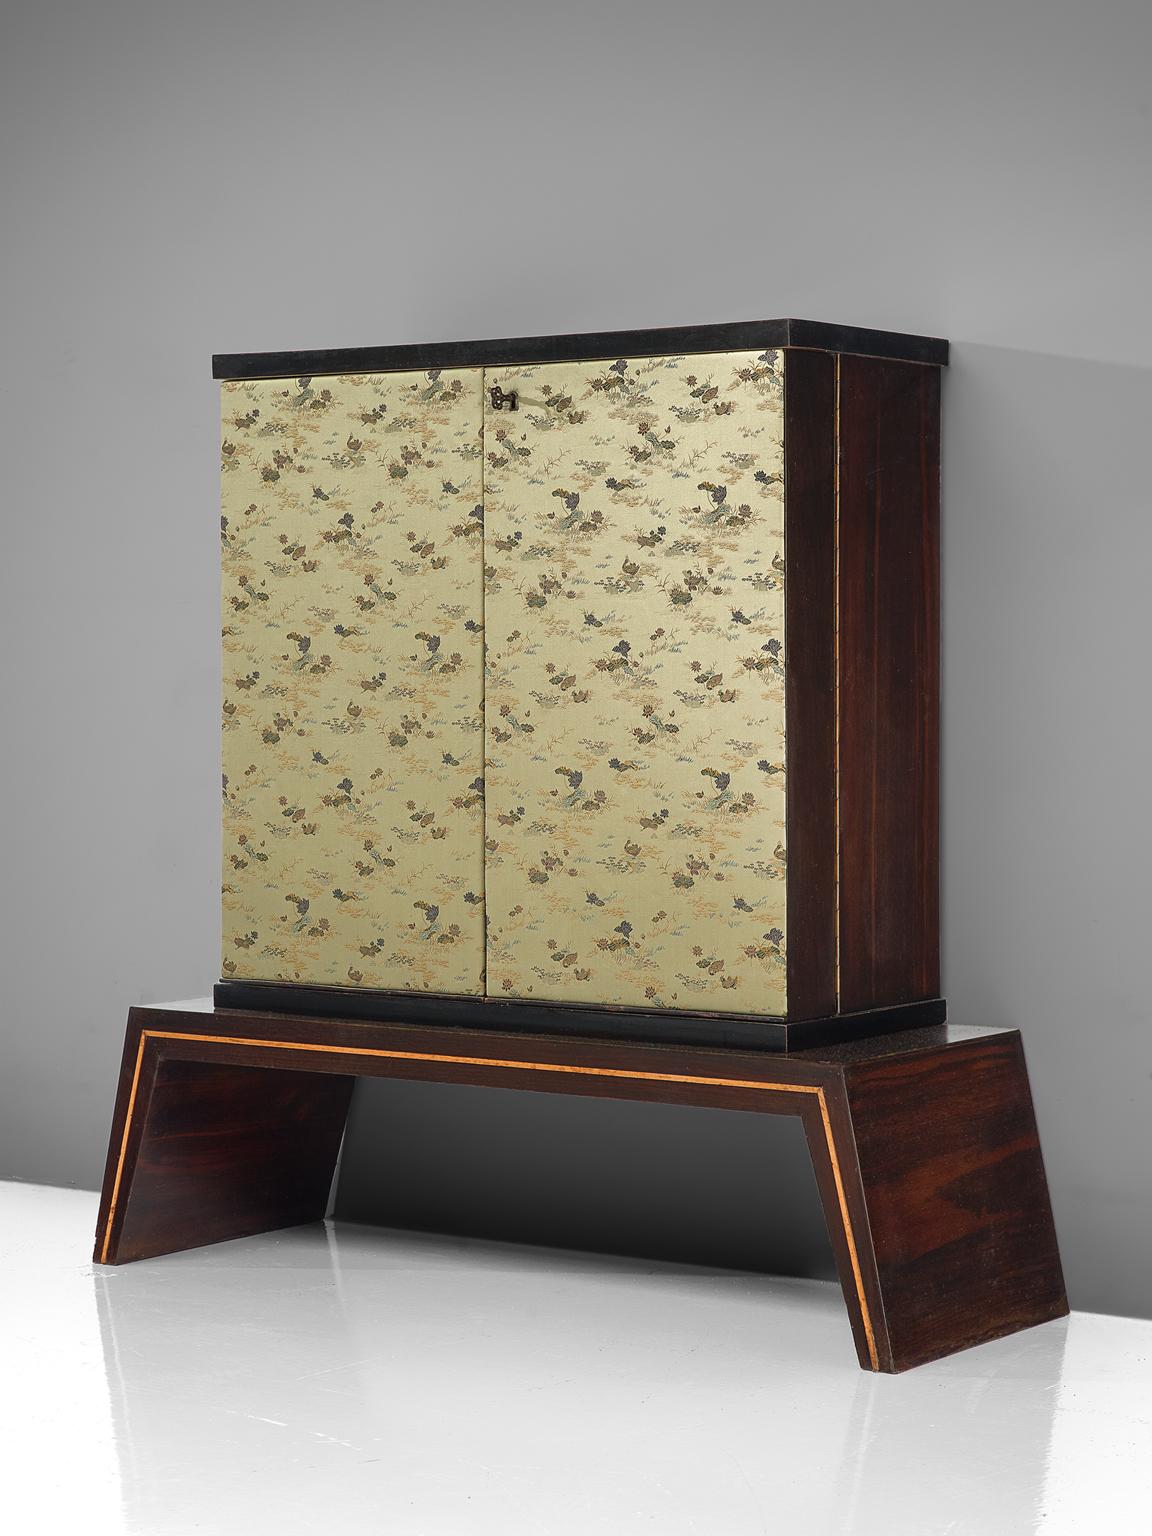 Dry bar cabinet, fabric, wood, mirror, Italy, 1950s.

This exquisite dry bar is illuminated and has a mirror interior with storage facilities. The front of the cabinet is covered with a silk fabric with a Japanese inspired fabric which is still